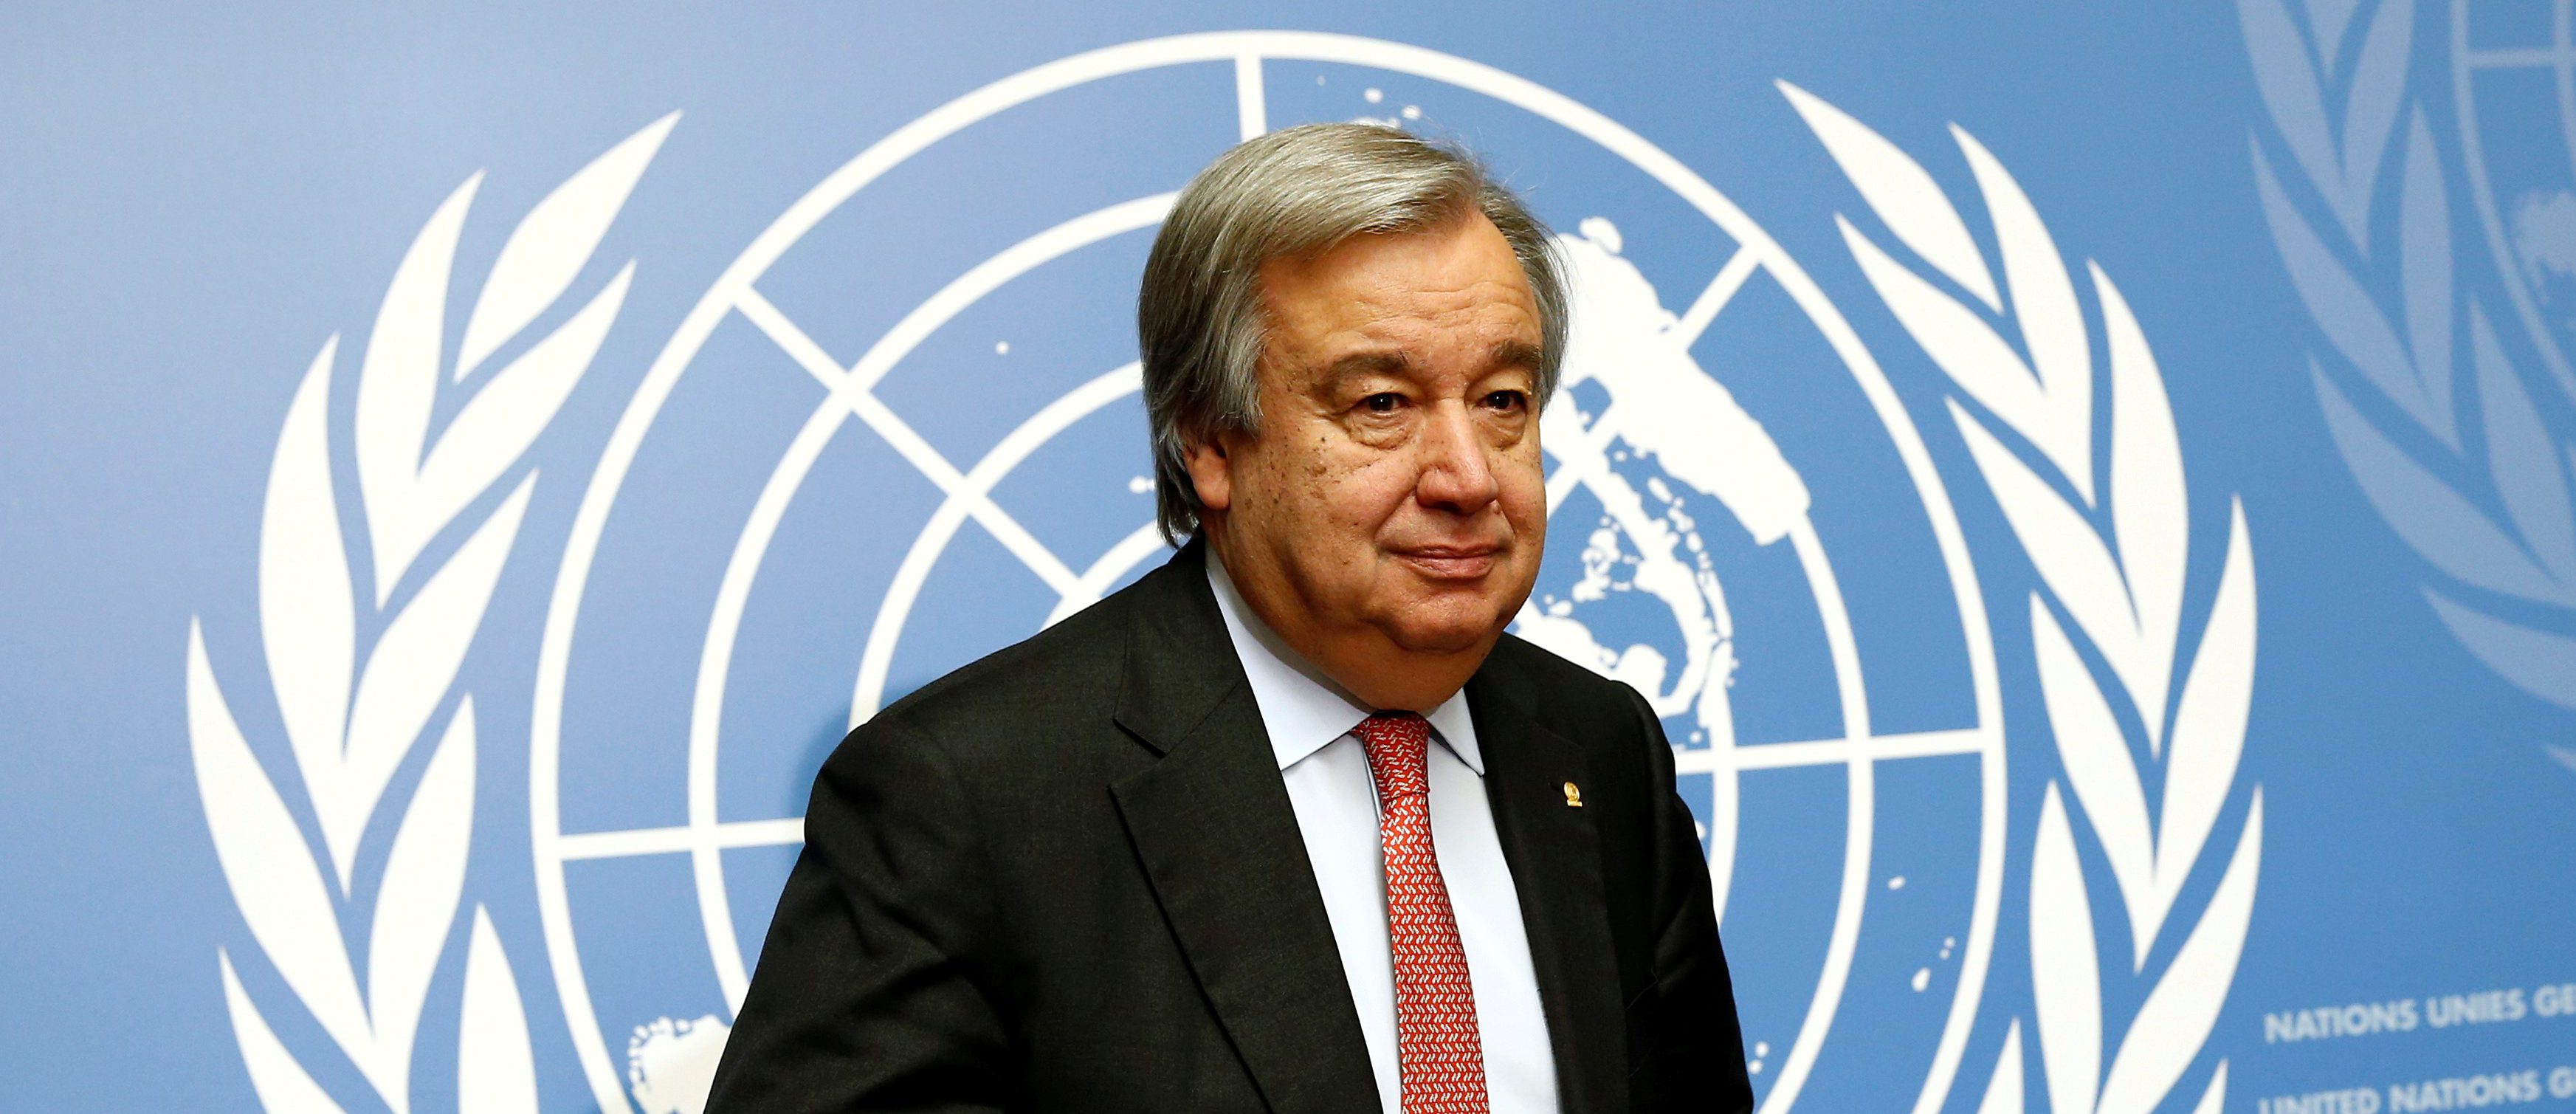 UN chief António Guterres appeals for "massive" help for flooded Pakistan